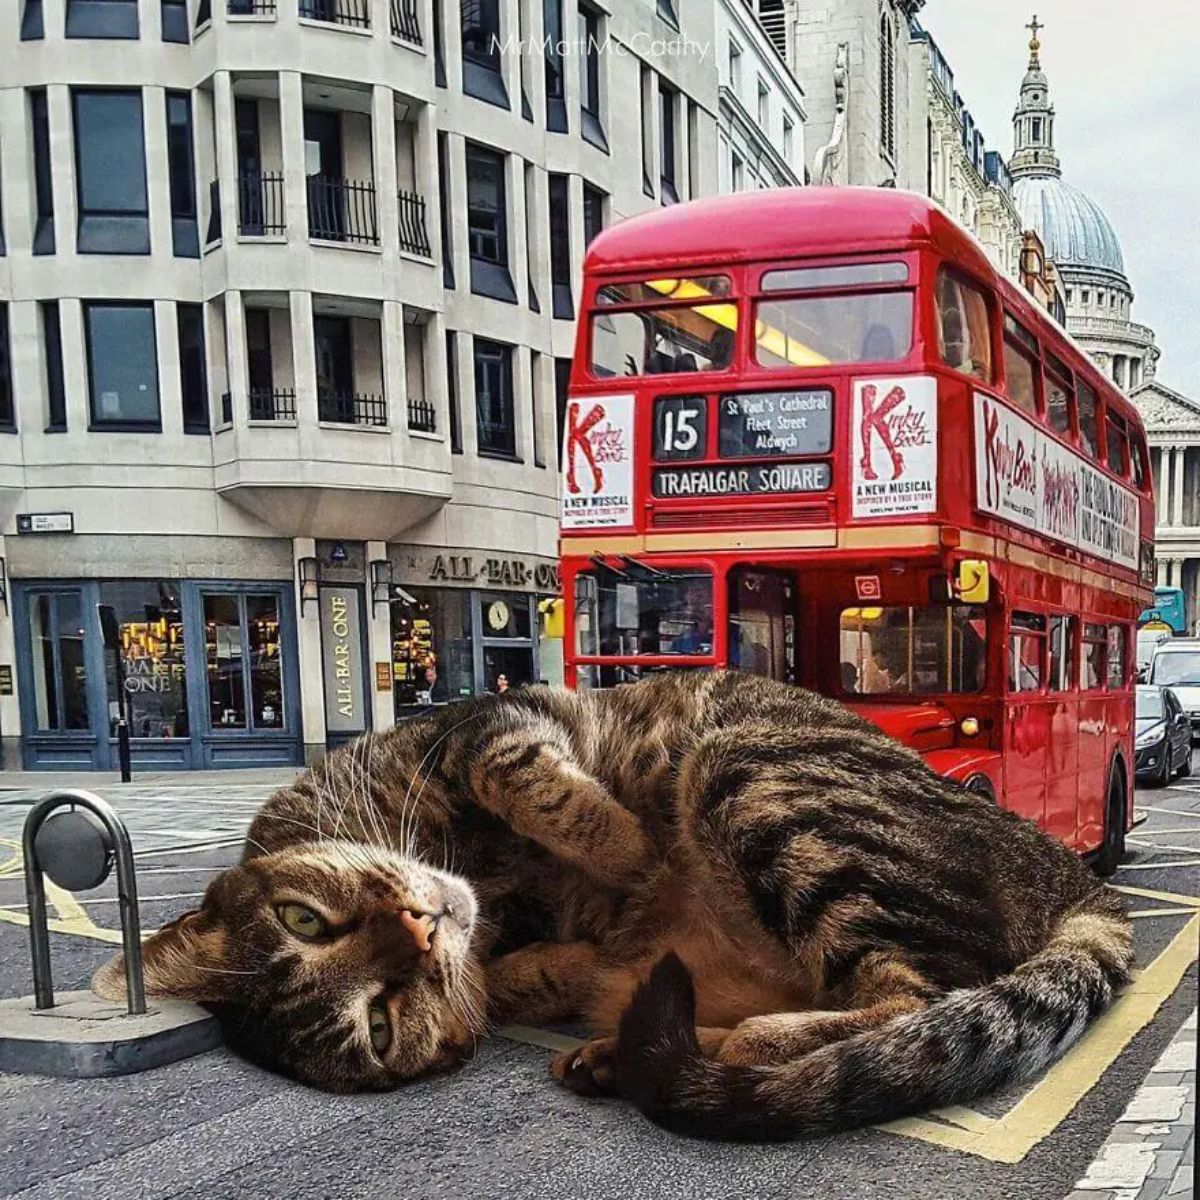 large photoshopped brown tabby cat laying sideways on the road in front a red double decker bus